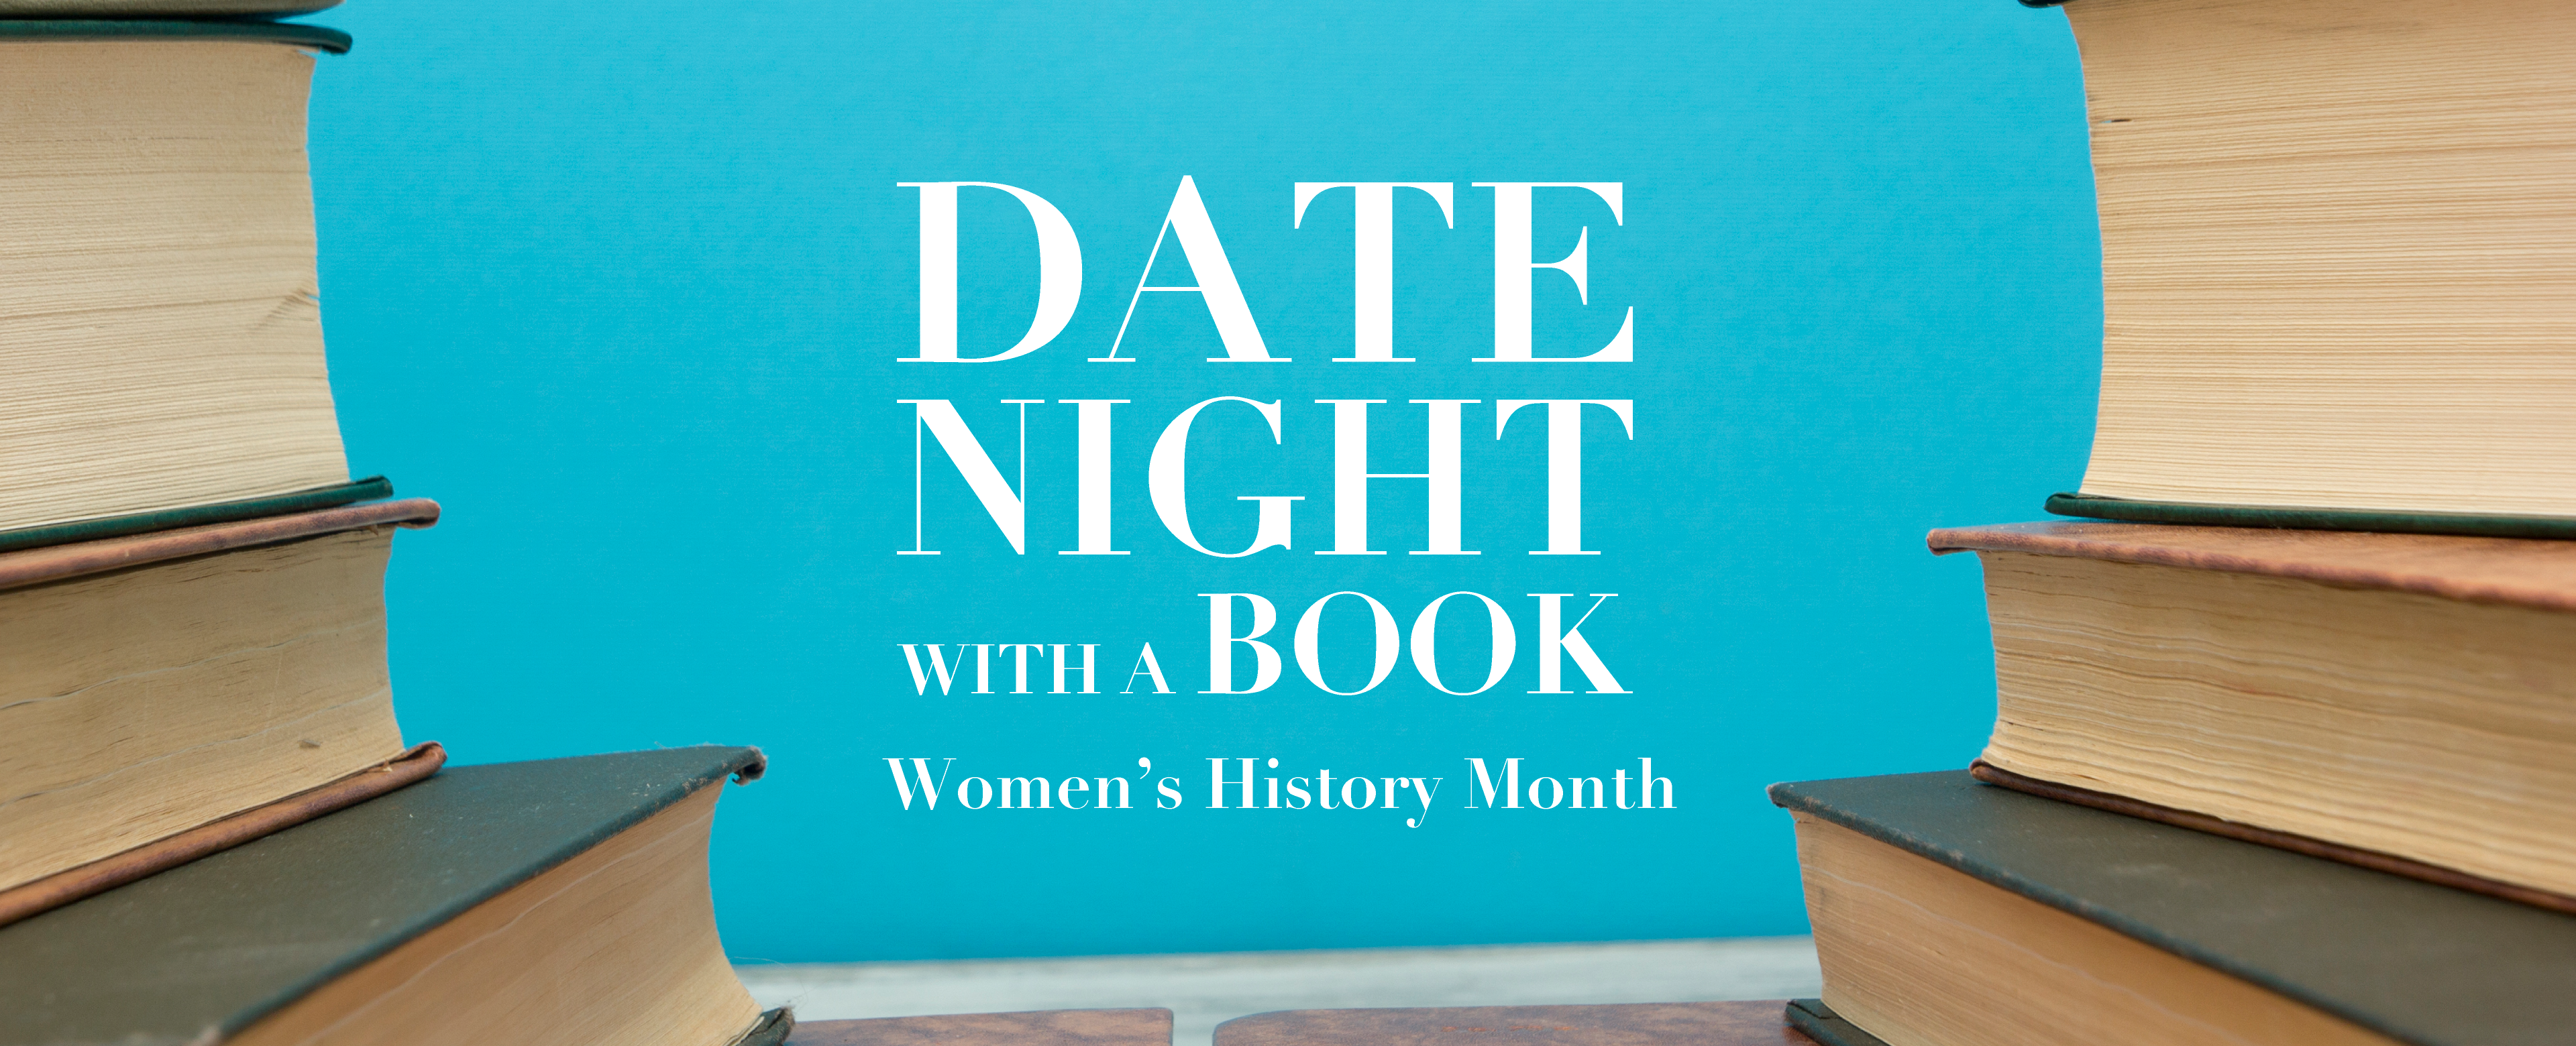 Date Night with a Book: Women's History Month 